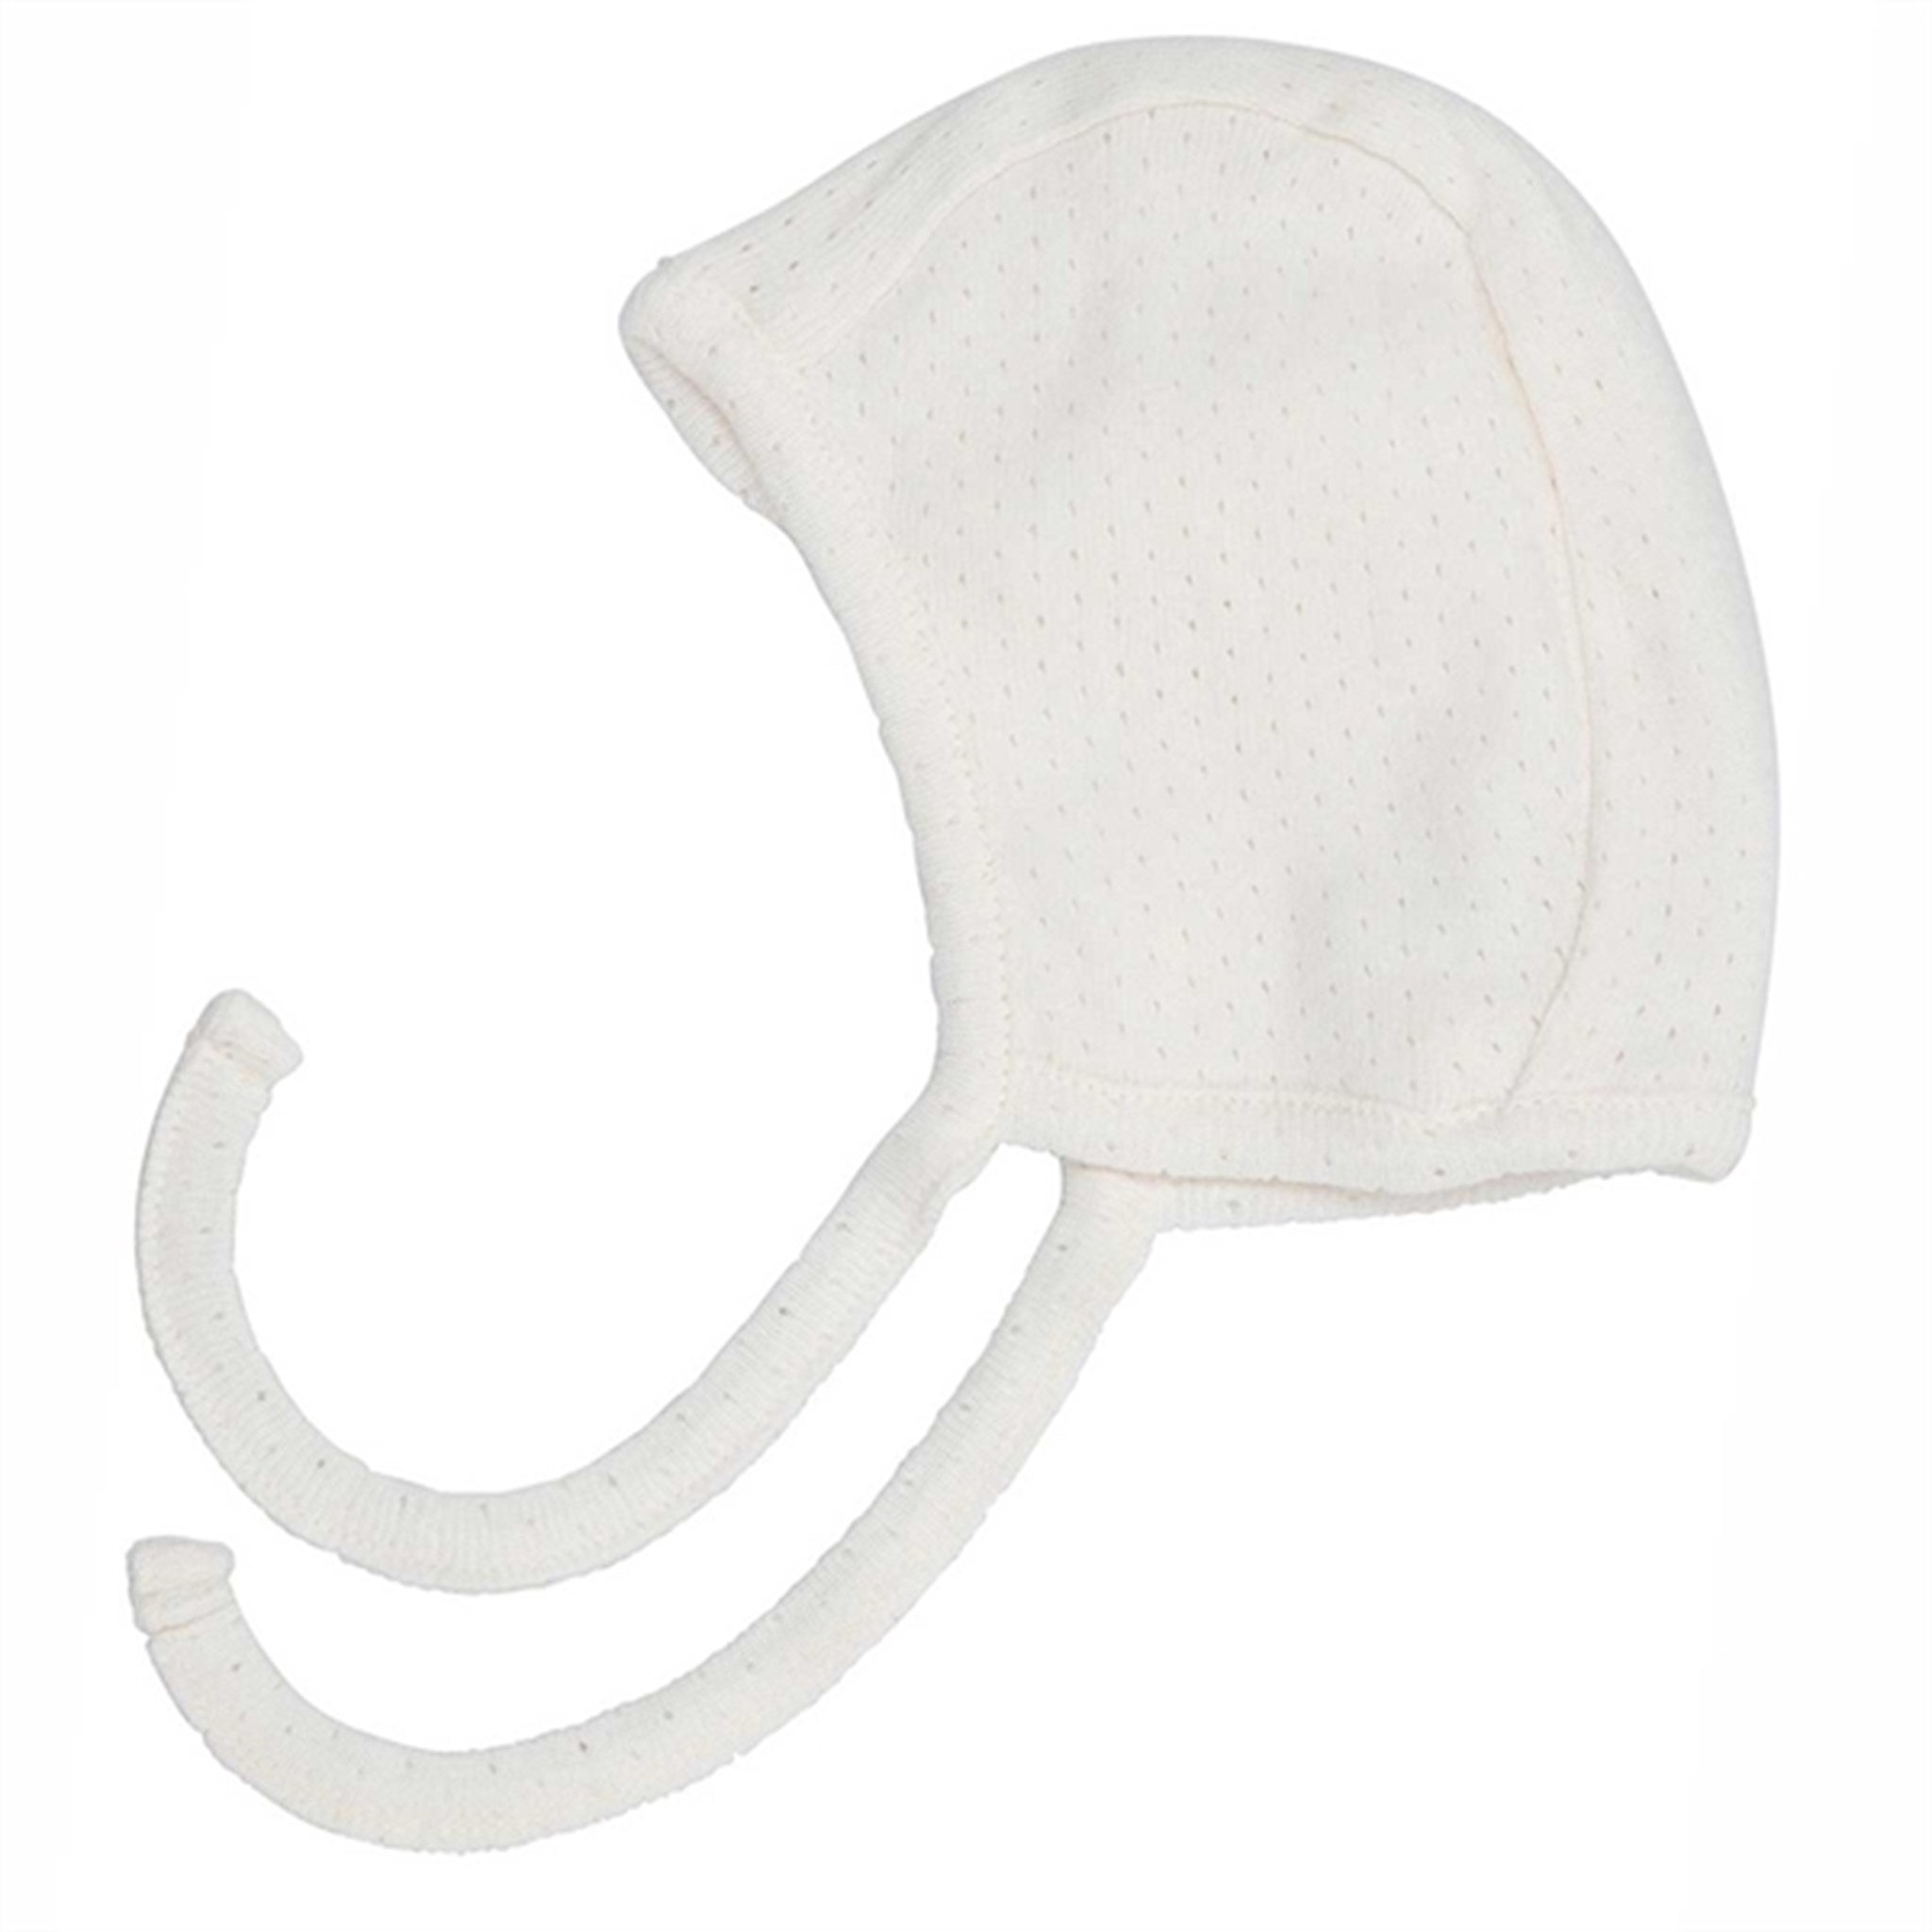 Serendipity Offwhite Baby Knitted Bonnet